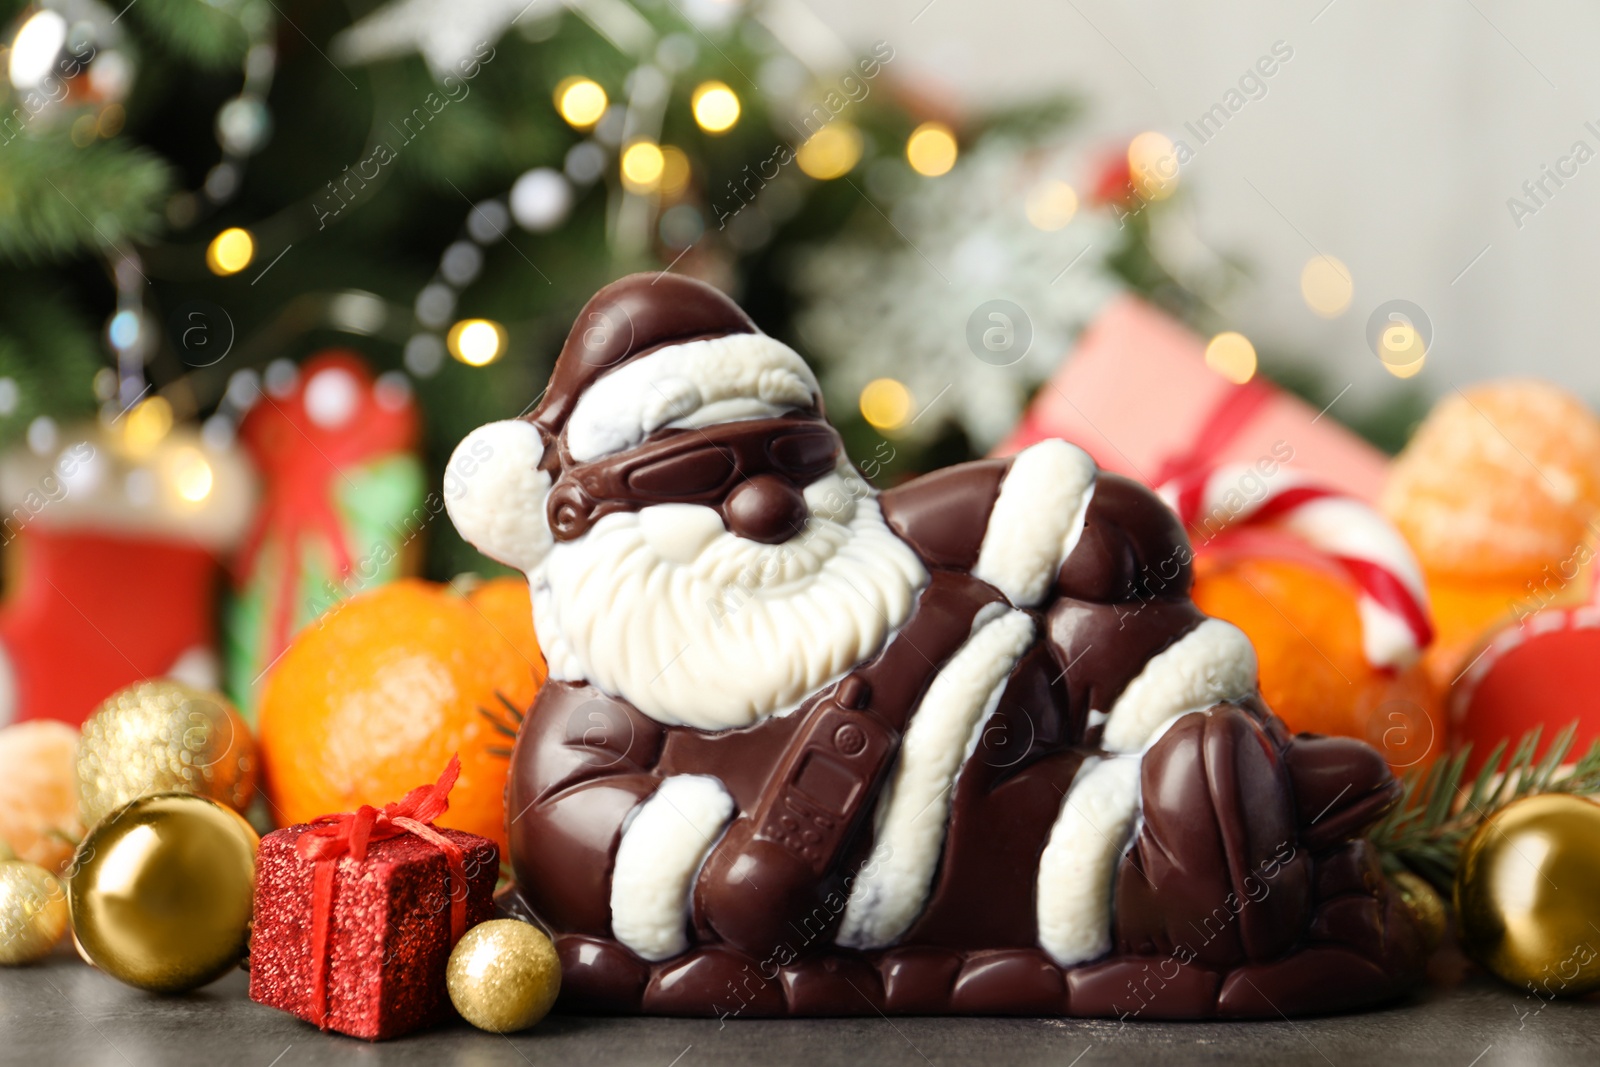 Photo of Composition with chocolate Santa Claus among sweets, decorations and tangerine fruits against Christmas tree, closeup